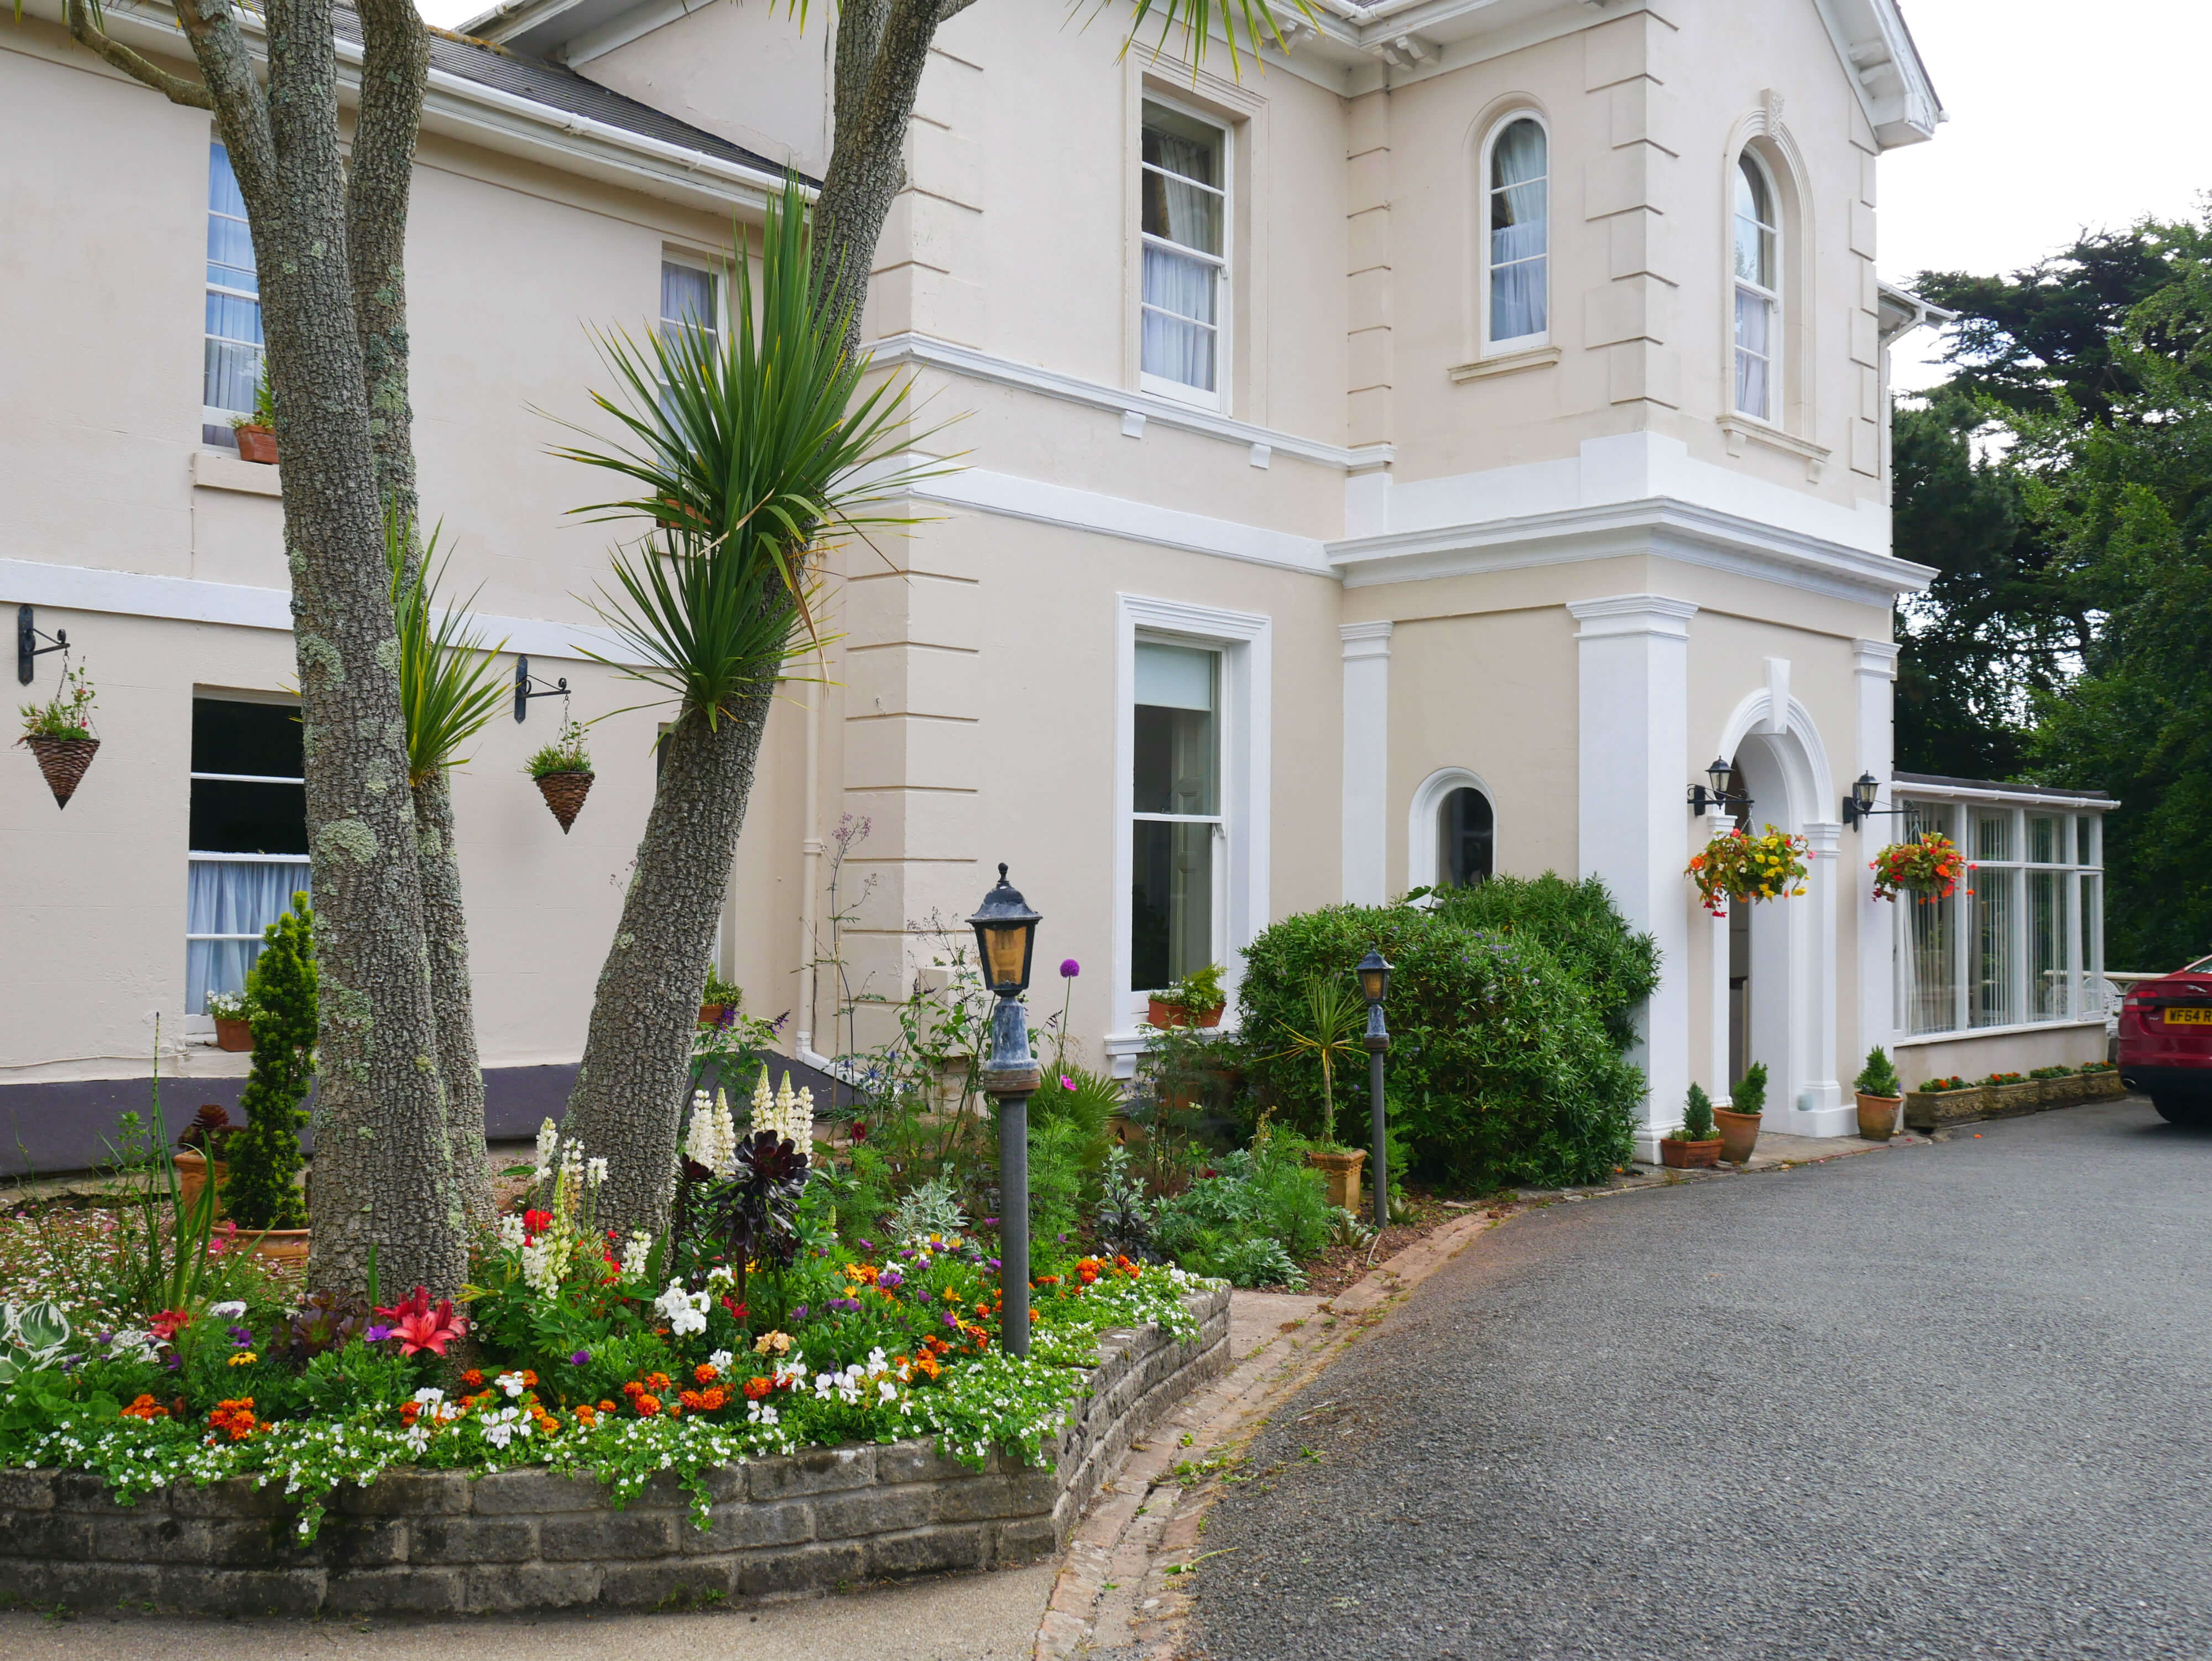 The Muntham Holiday Apartments and Townhouse, Torquay